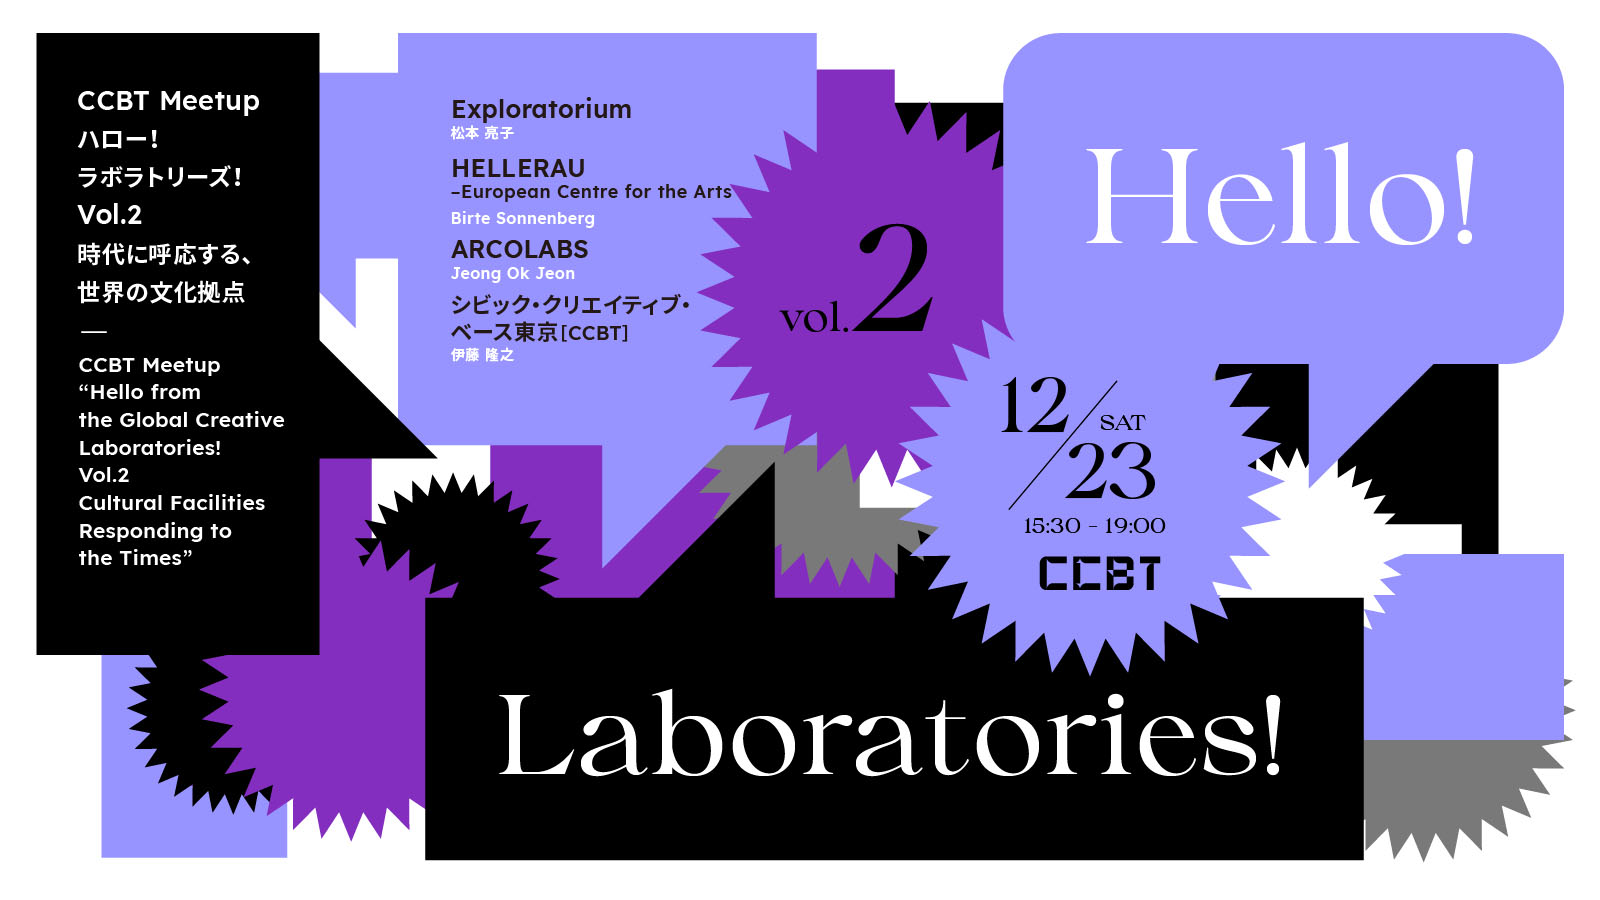 Hello from the Global Creative Laboratories! Vol. 2: Cultural Facilities Responding to the Times